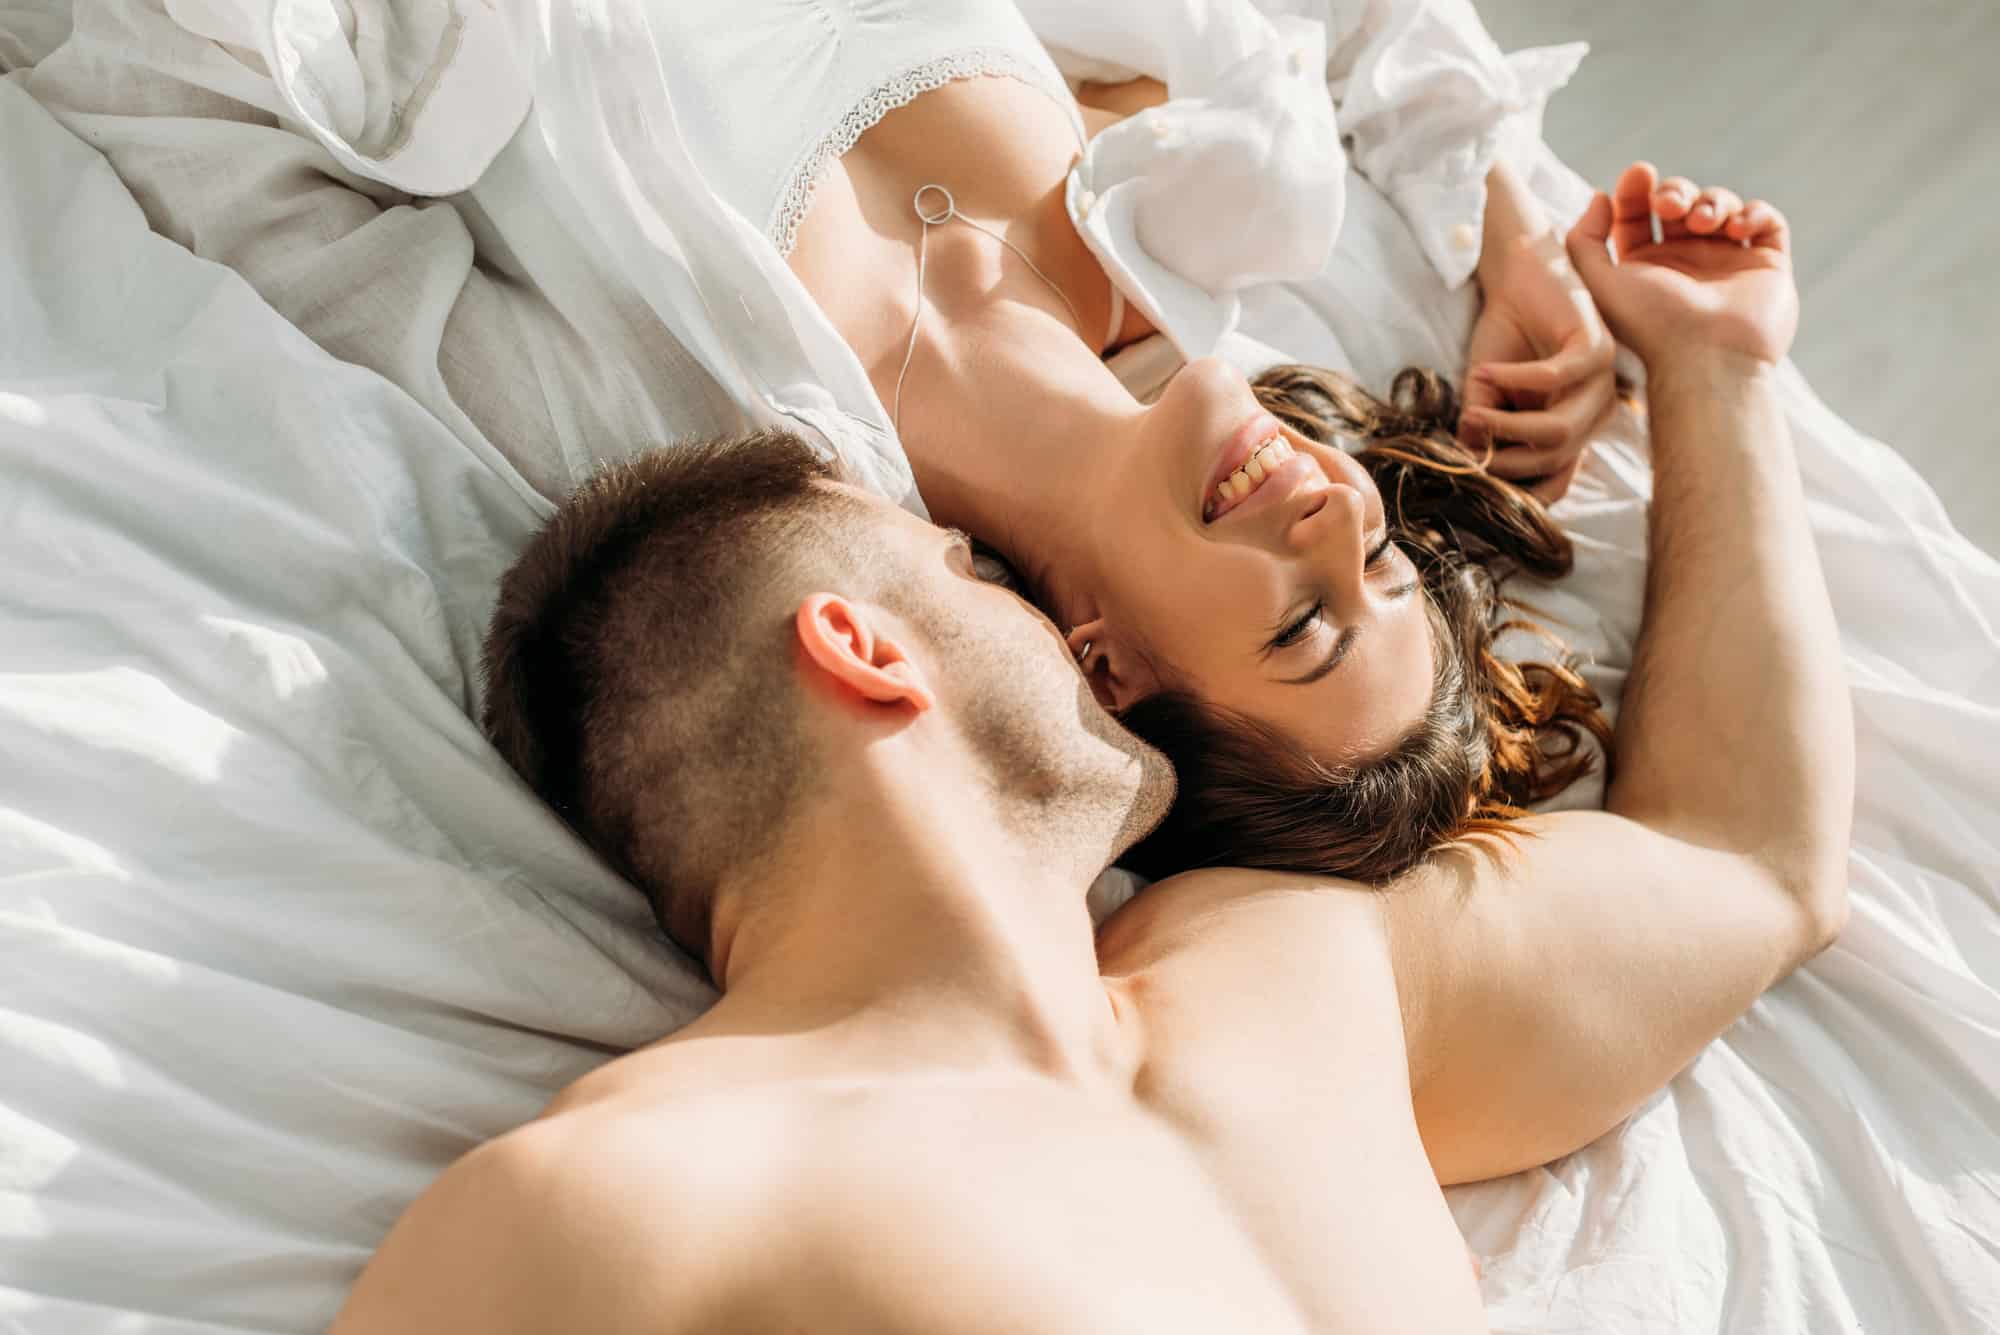 New Things To Try In Bed With Your Boyfriend